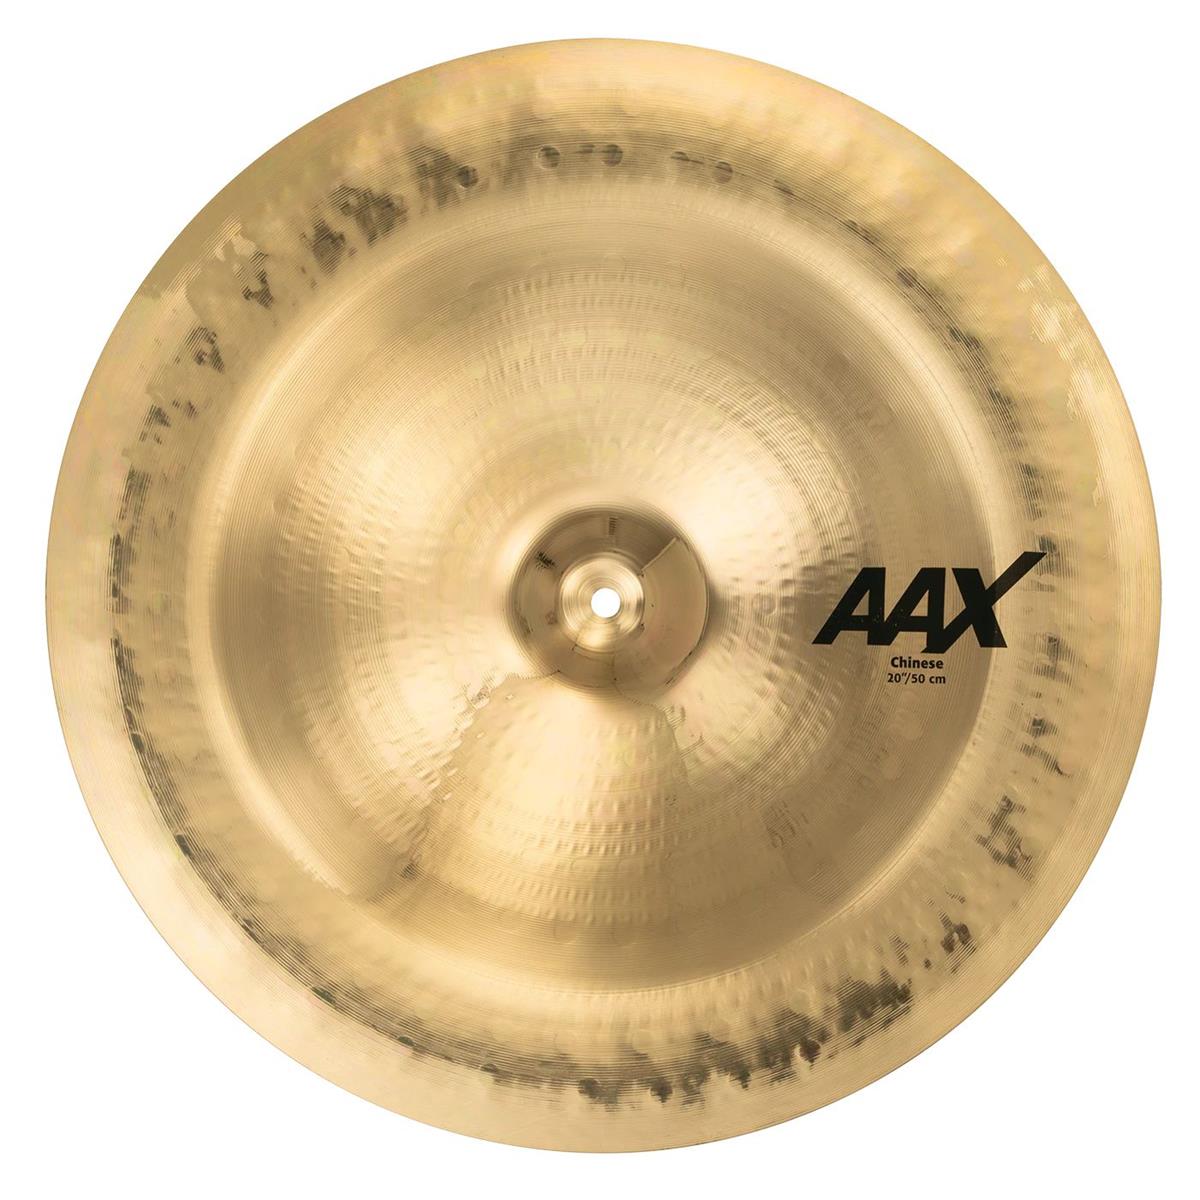 Sabian 20" AAX Chinese Cymbal, Thin, Brilliant Finish SABIAN 20" AAX Chinese delivers Modern Bright, biting response that is big, brash and trashy. The SABIAN AAX series delivers consistently bright, crisp, clear and cutting responses AAX is the ultimate Modern Brigth sound!